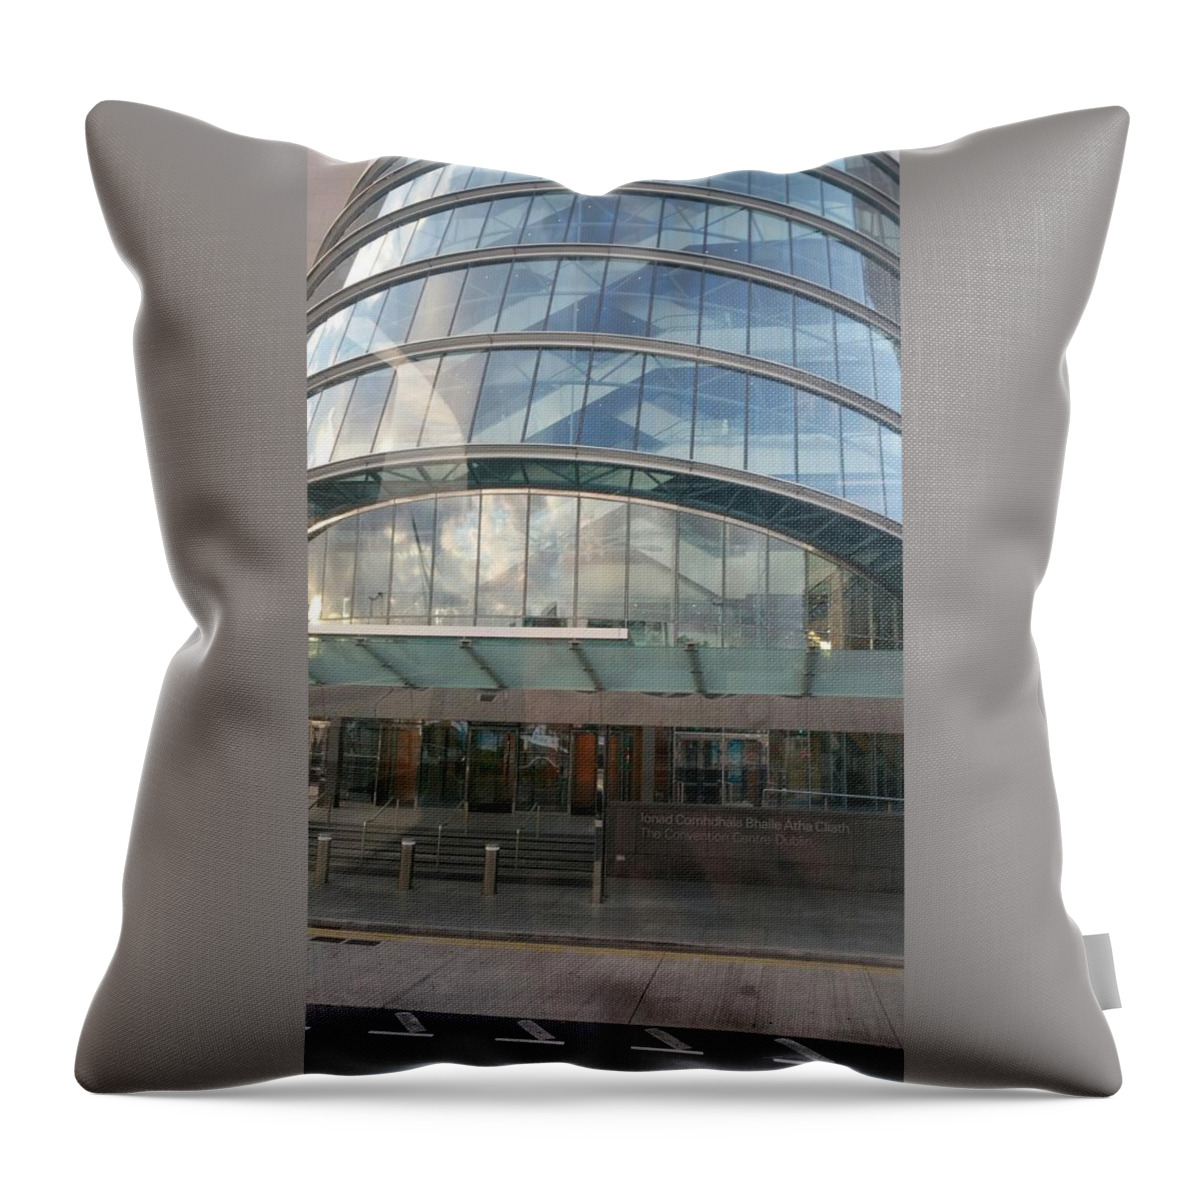 Skyscraper Towered Architecture Towering Skyward Throw Pillow featuring the photograph Skyscraper 2 by Zachary Lowery